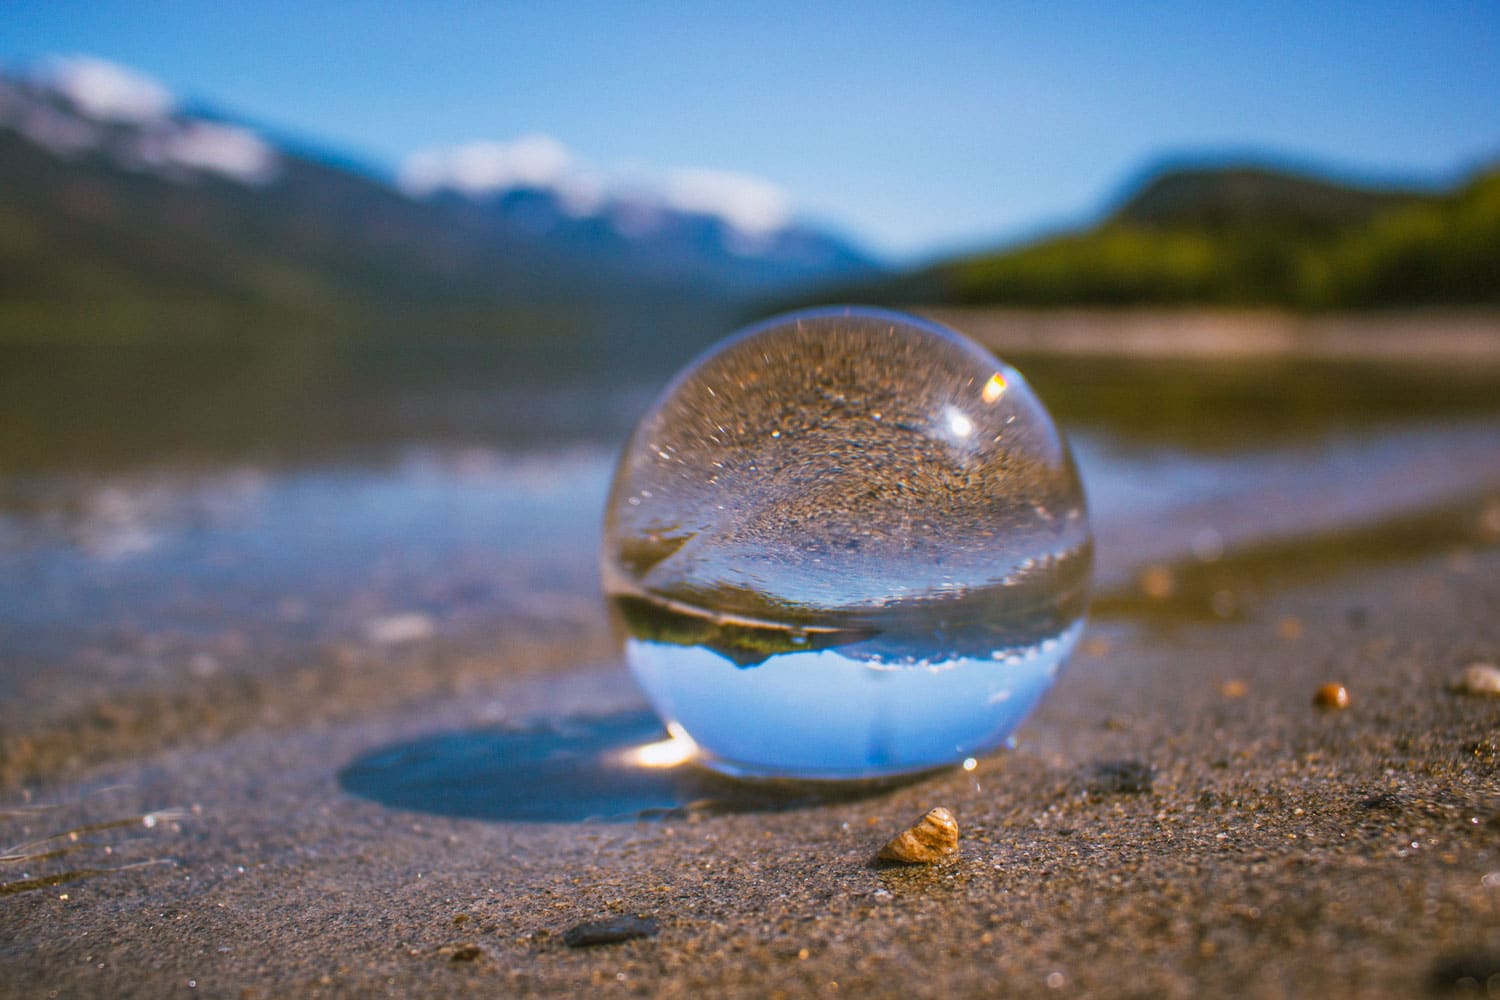 Glass ball in the sand. Image reflected in ball is upside down.